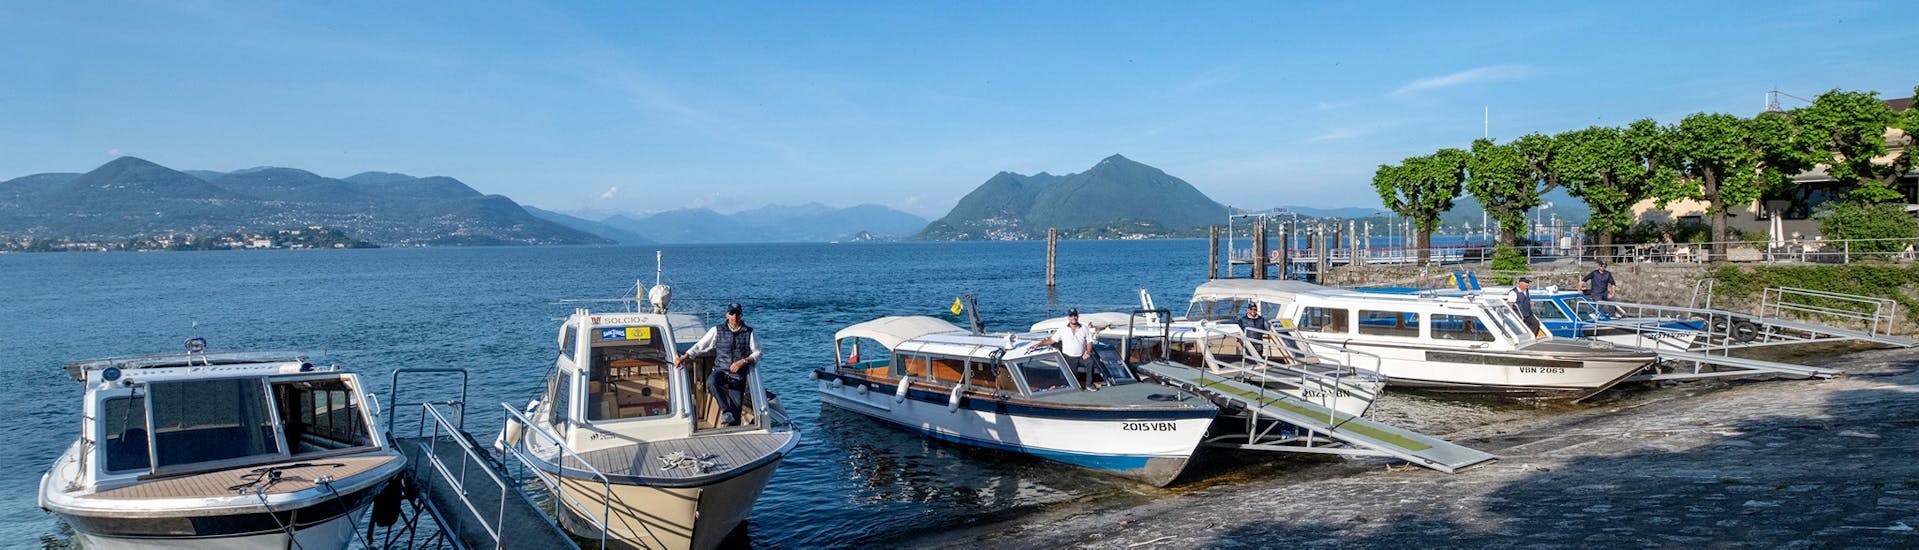 View of the boats used for the Boat Transfer from Stresa to Isola Pescatori and Isola Bella with Lake Tours Stresa.